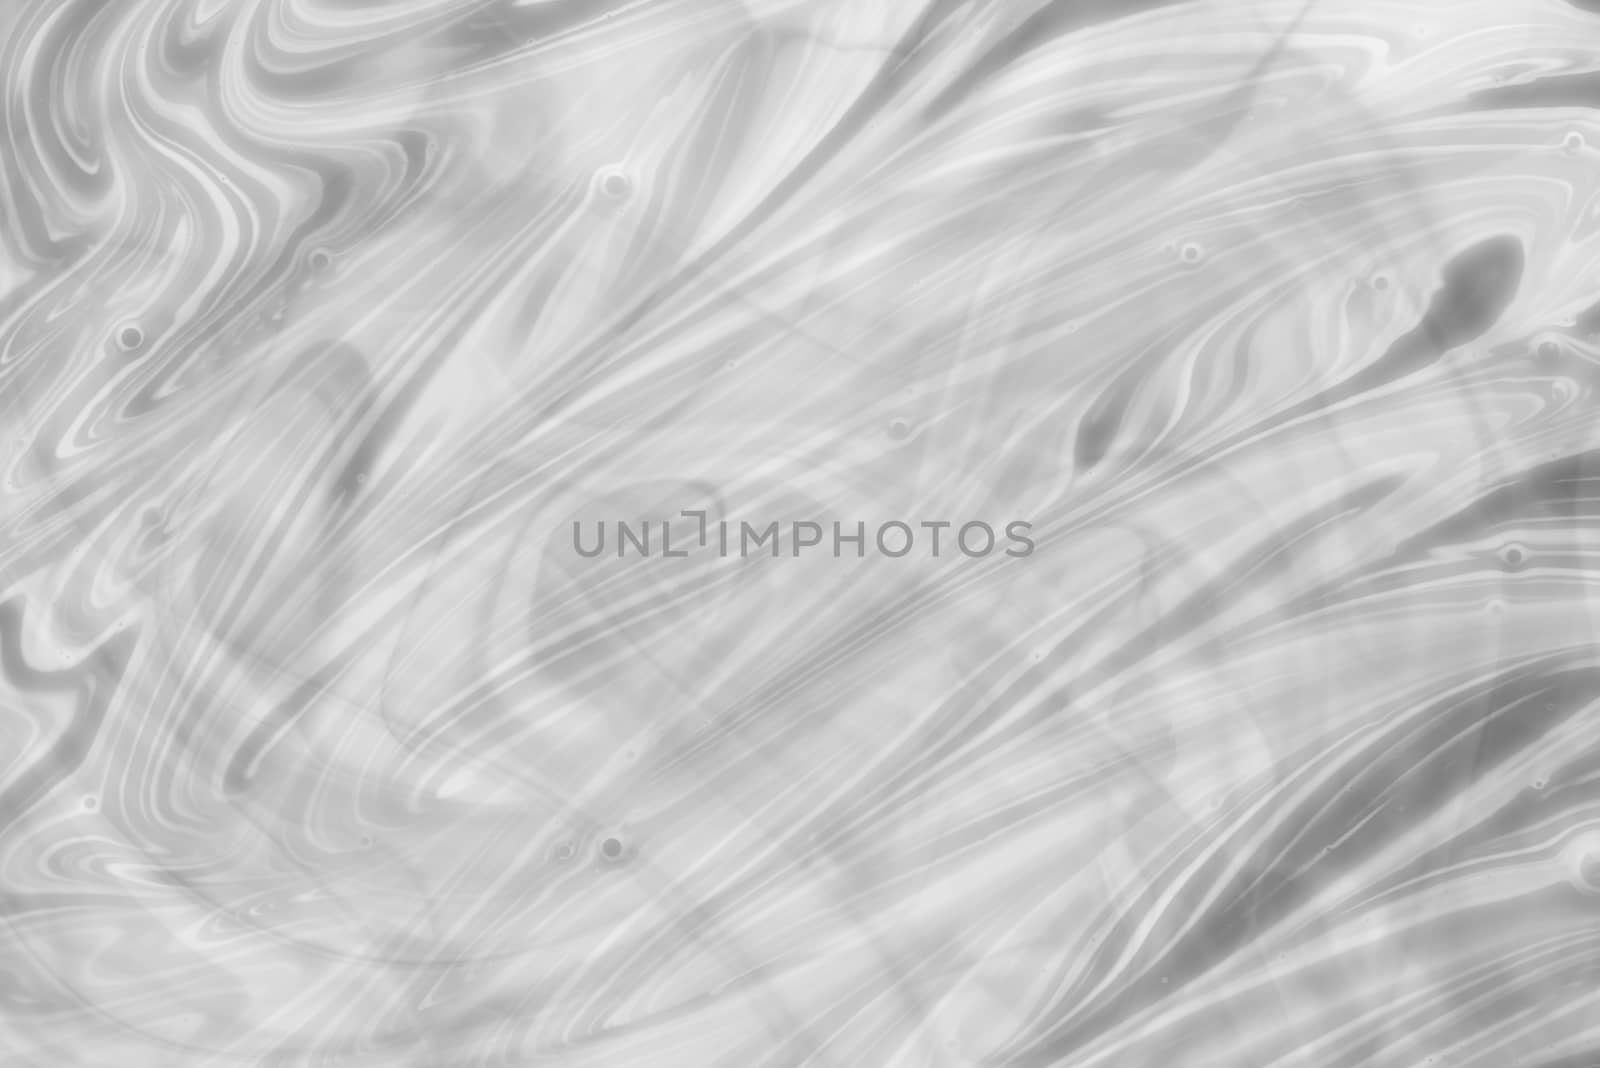 Black and white fluid pattern. Abstract painted background. Decorative marble texture. Black and white background